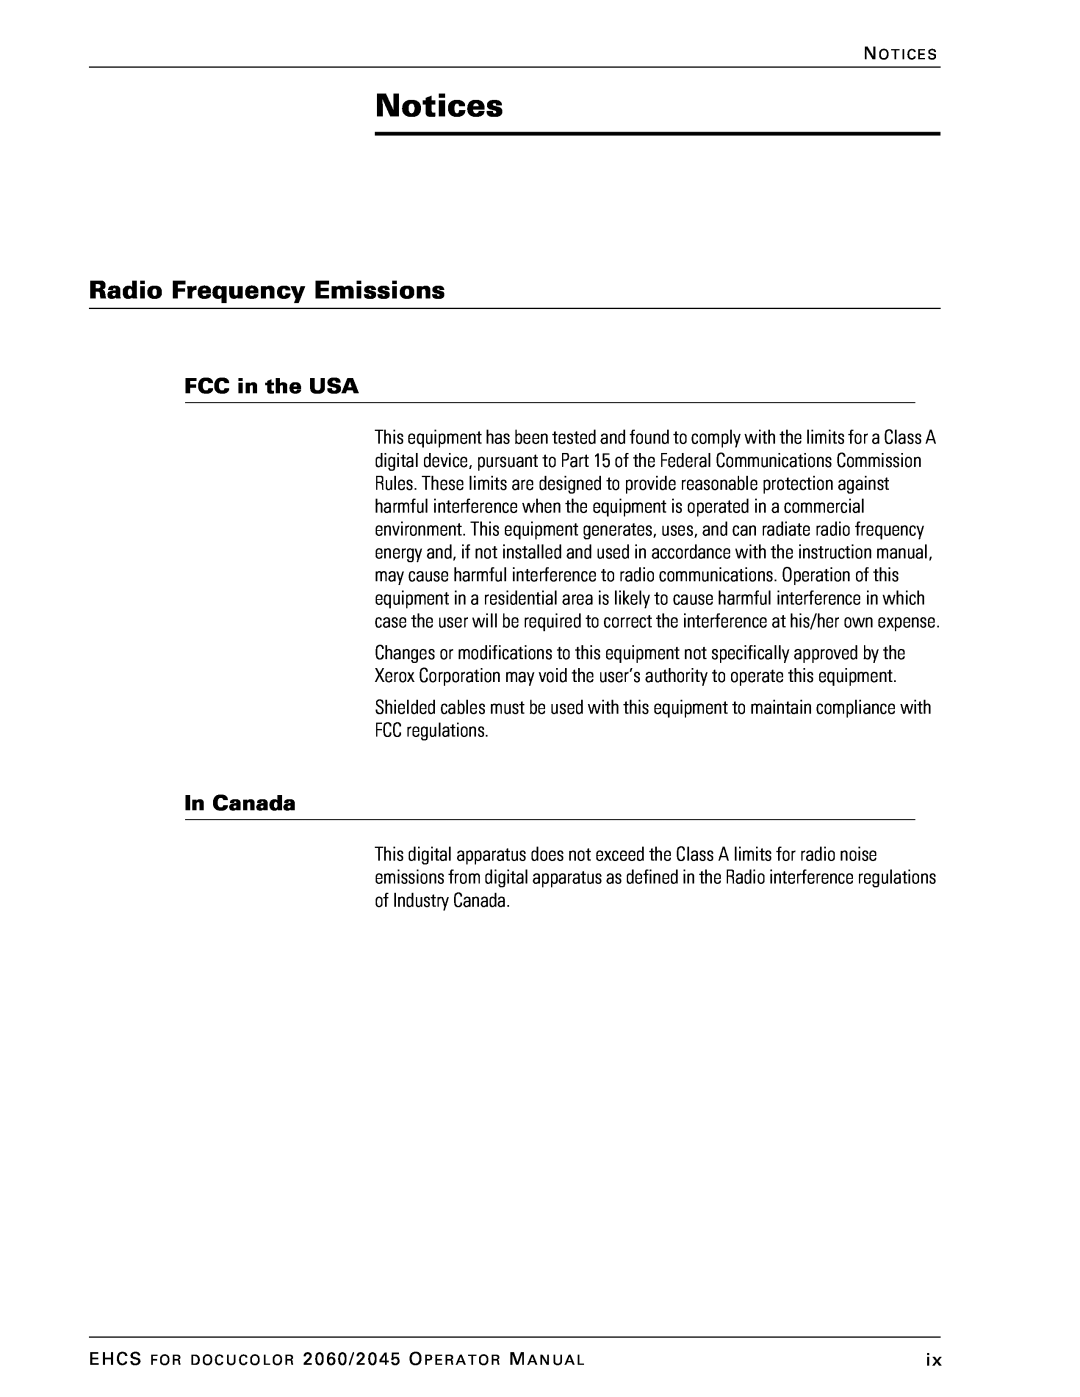 Xerox 2045 manual Notices, Radio Frequency Emissions, FCC in the USA, In Canada 